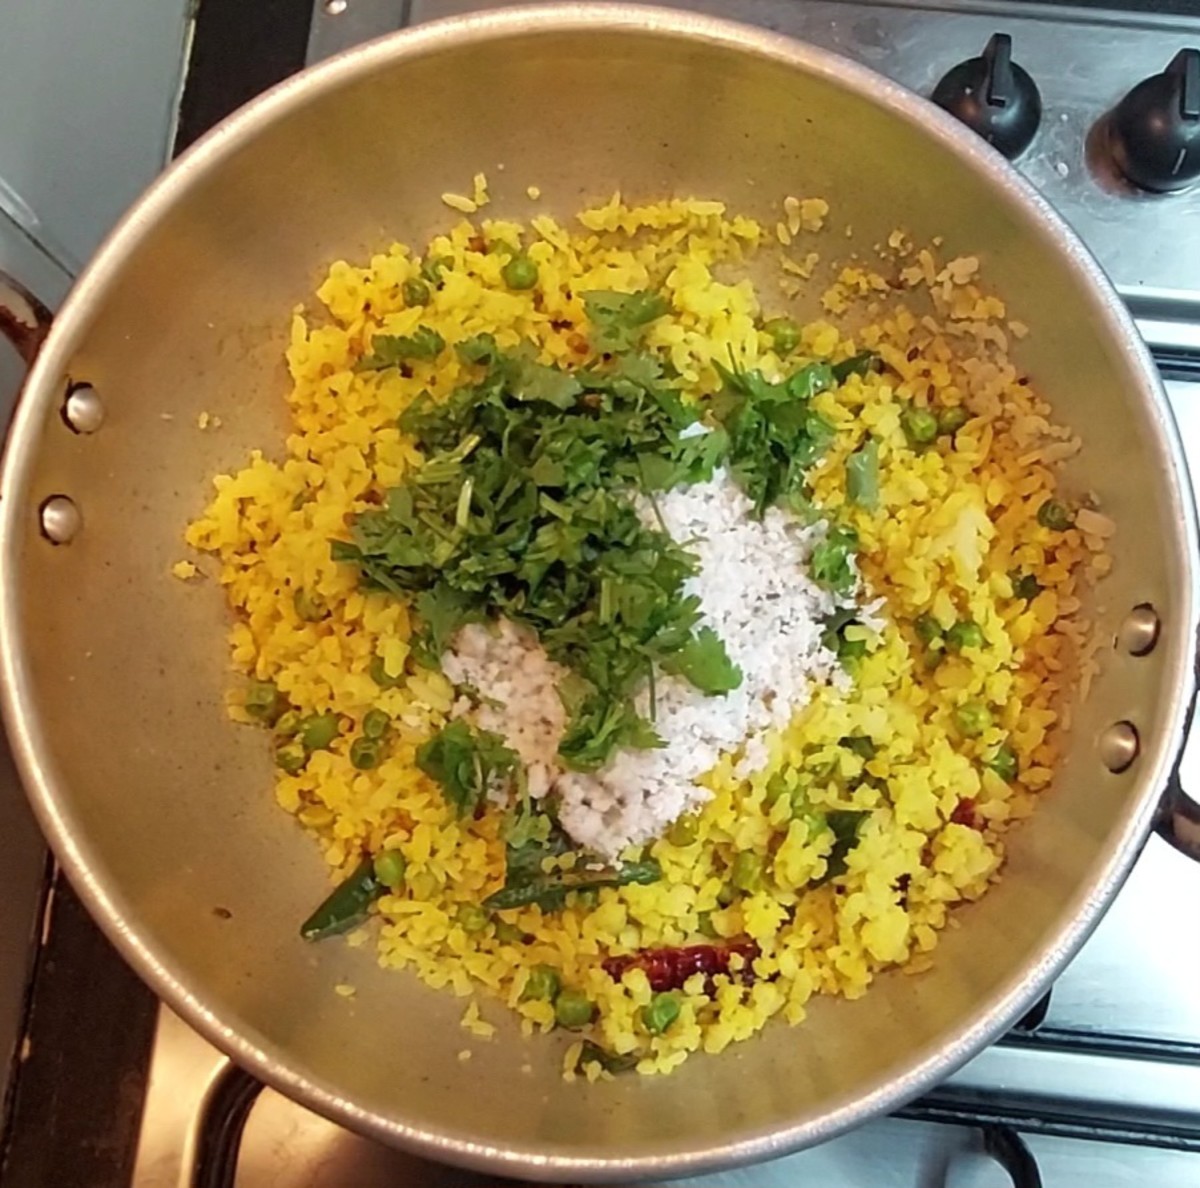 Add 1/2 cup fresh grated coconut, 1/4 cup chopped coriander leaves, mix well.